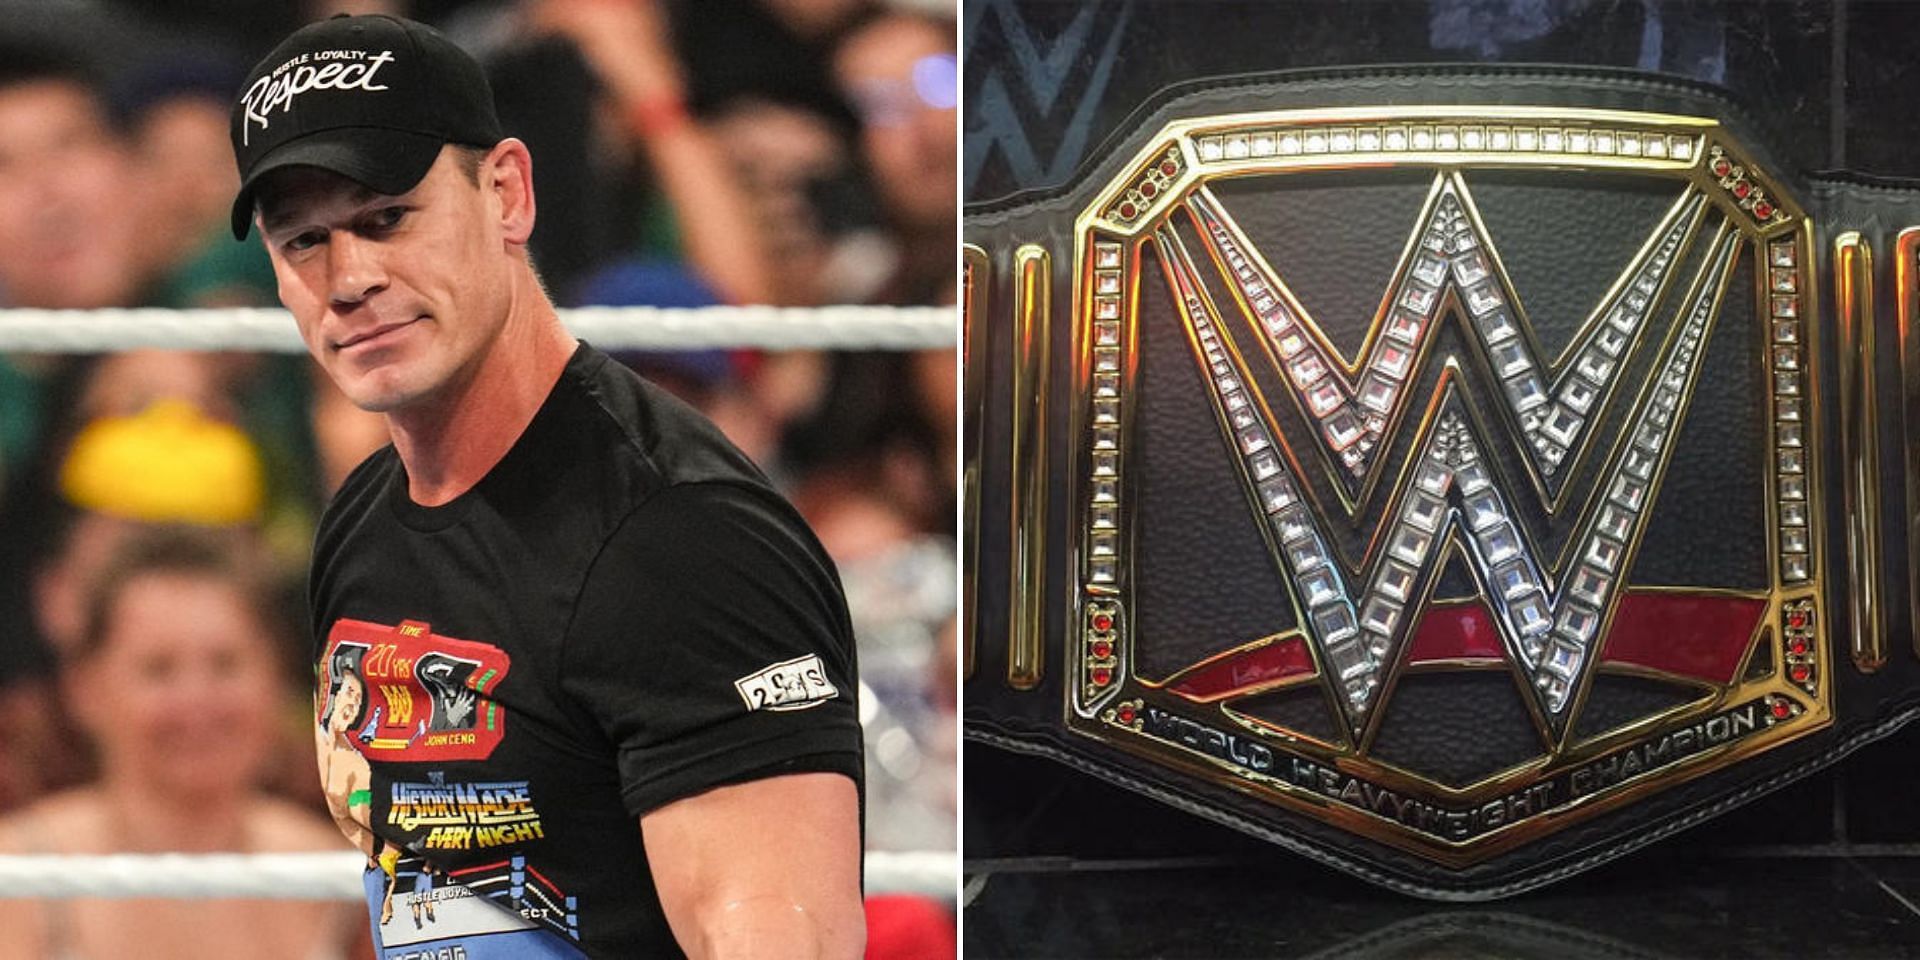 A former WWE Champion wants another match against John Cena